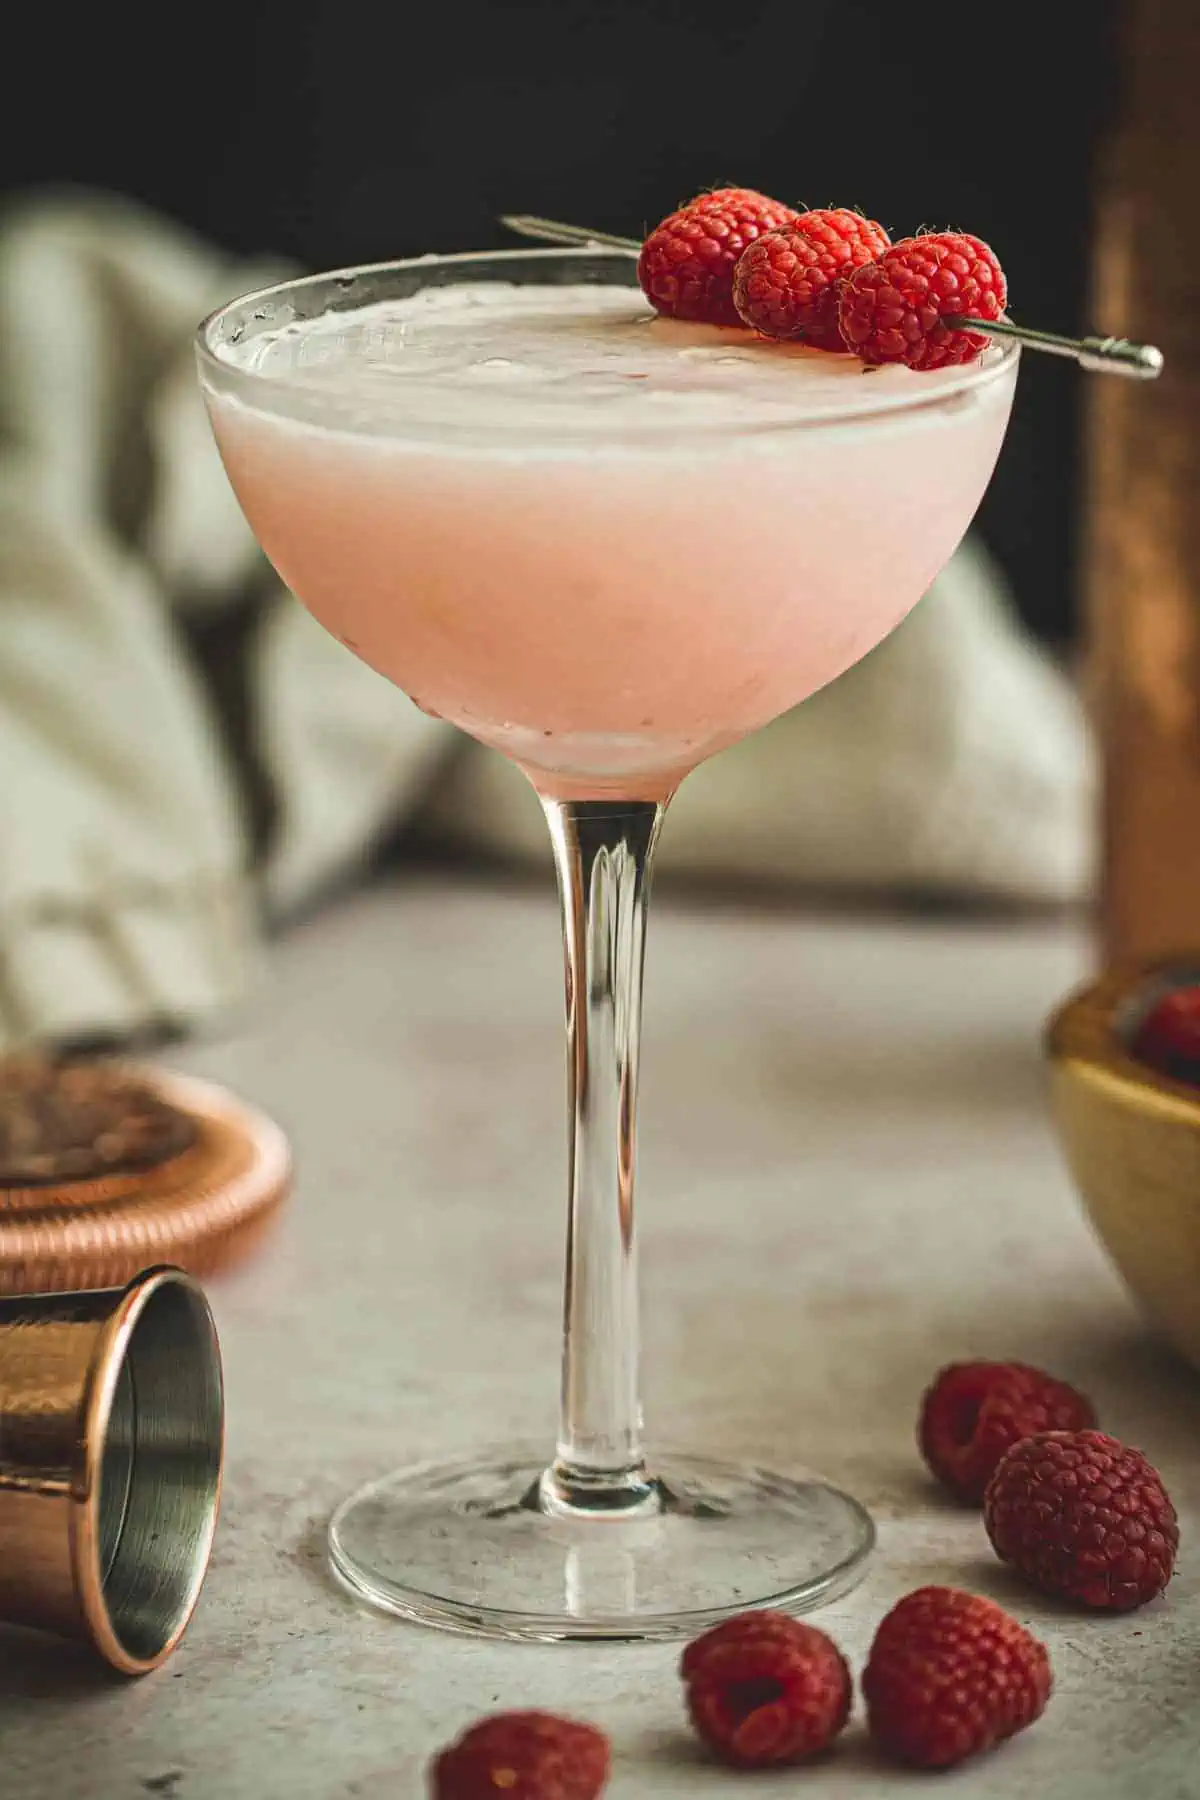 Clover club cocktail garnished with fresh raspberries.